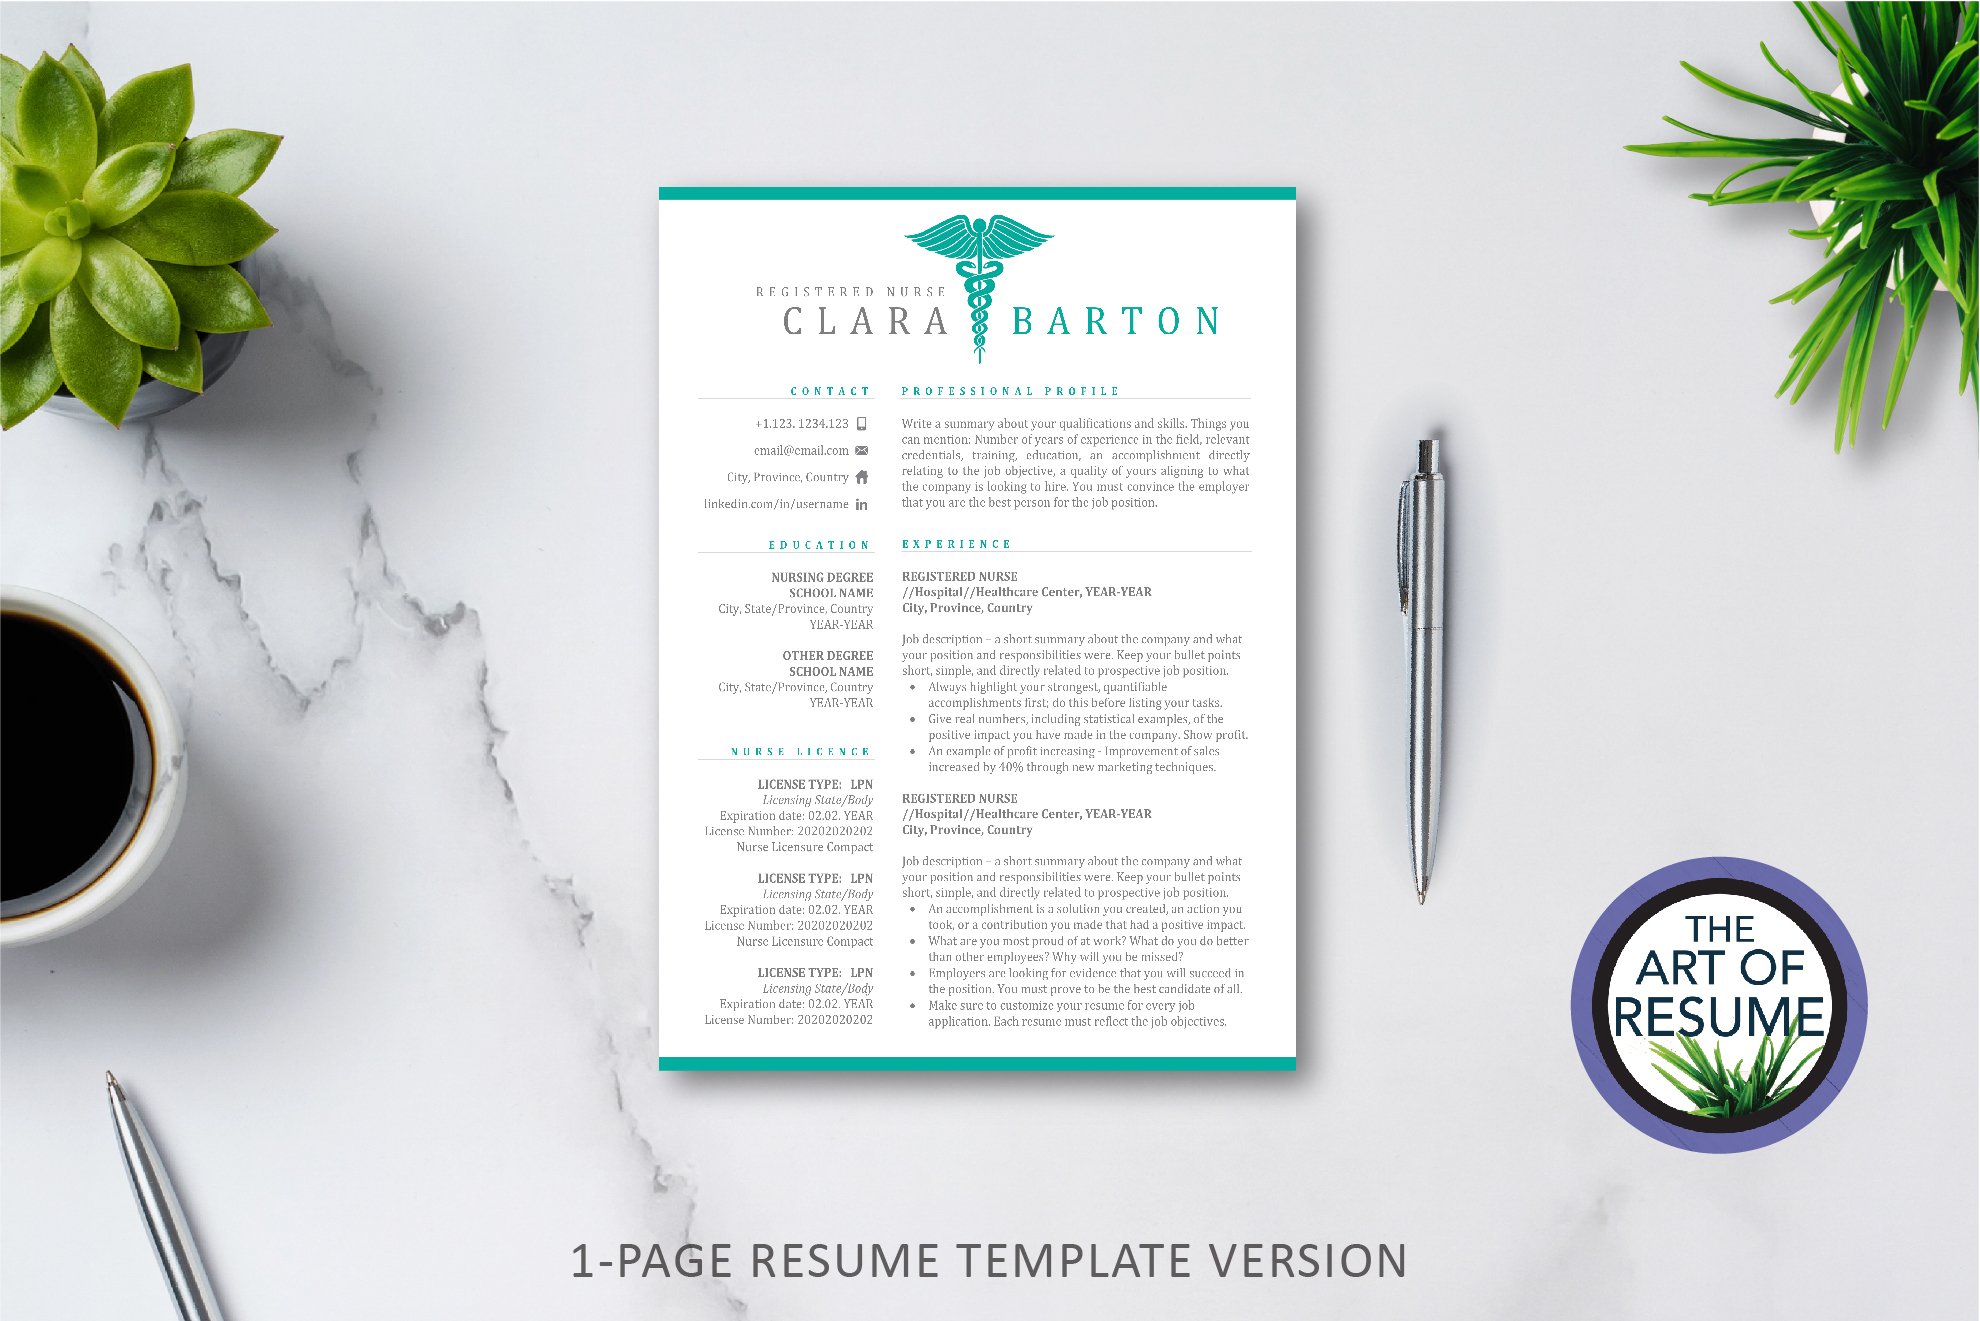 Resume template with a cup of coffee next to it.